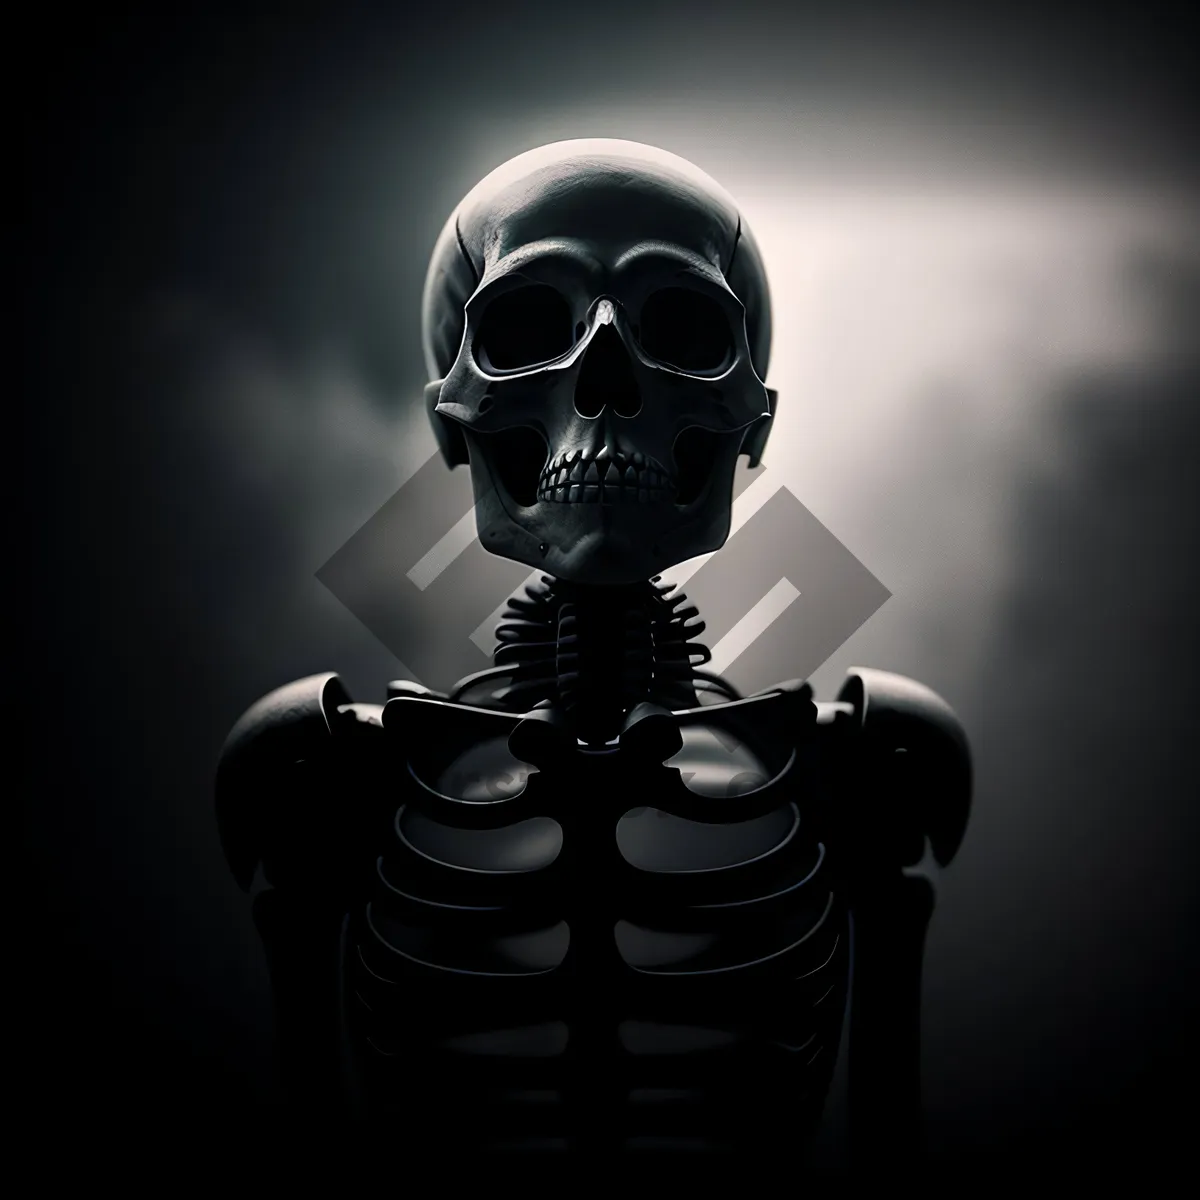 Picture of Terrifying Anatomical Skull Image: Spooky Conceptual Man